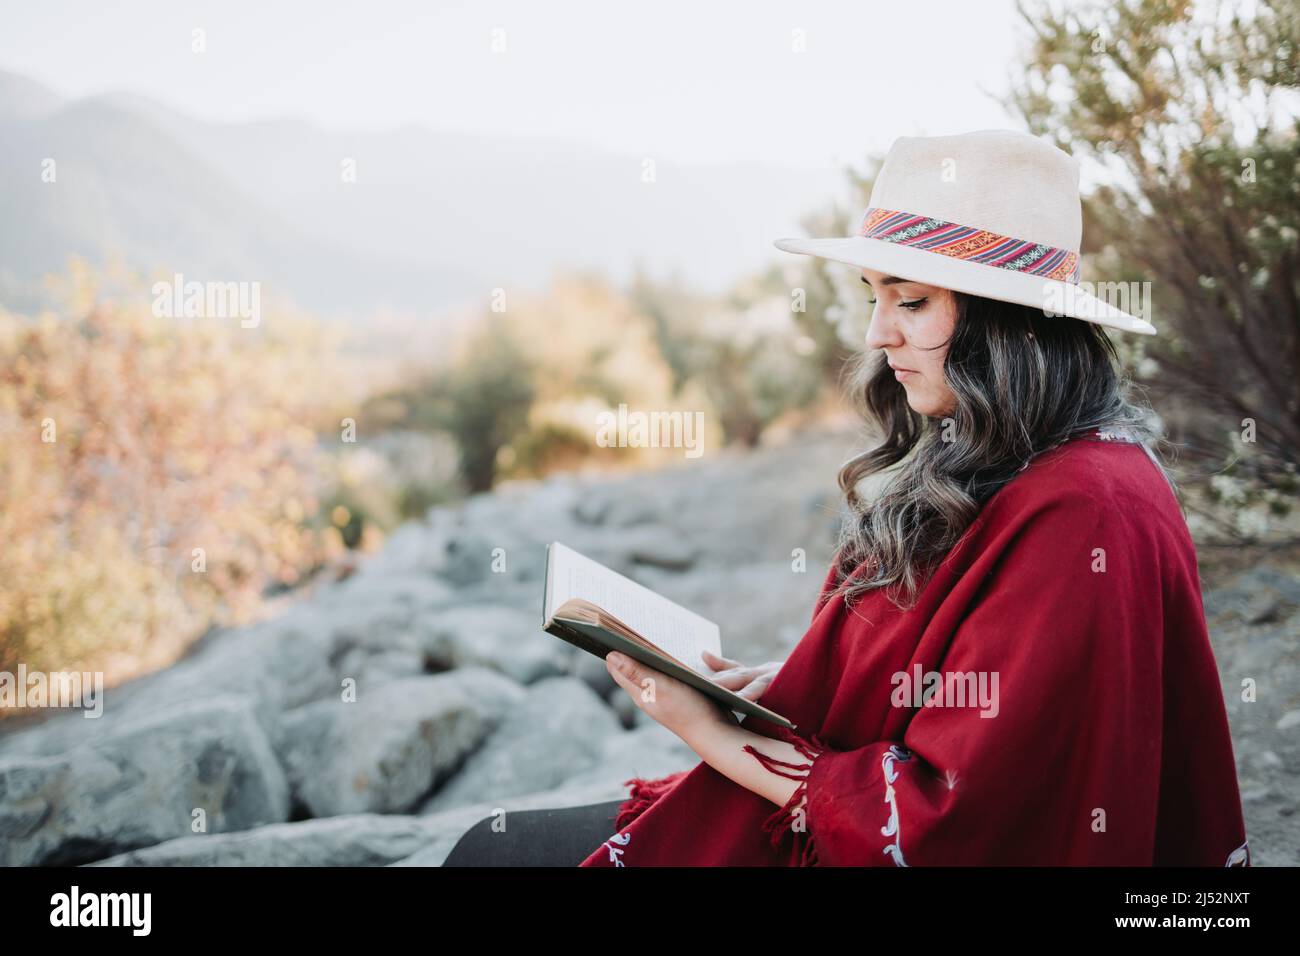 Young latin woman using a hat and a red poncho, sitting outdoor and reading a book. Copy space. Stock Photo